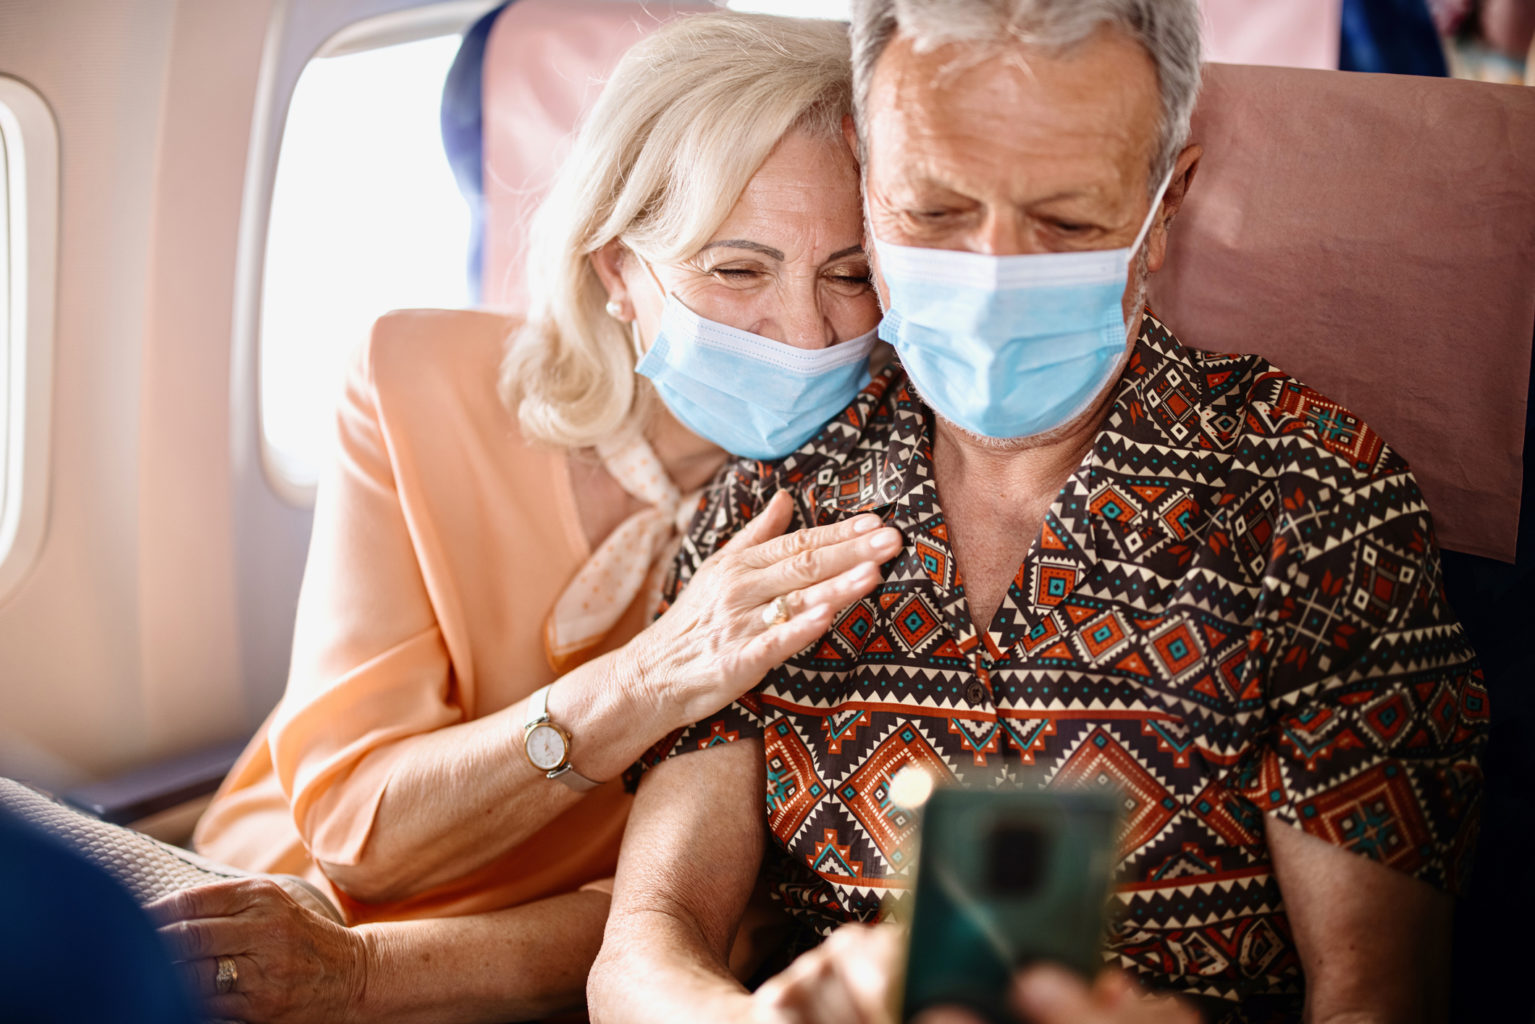 Passengers wearing protective face masks during flight